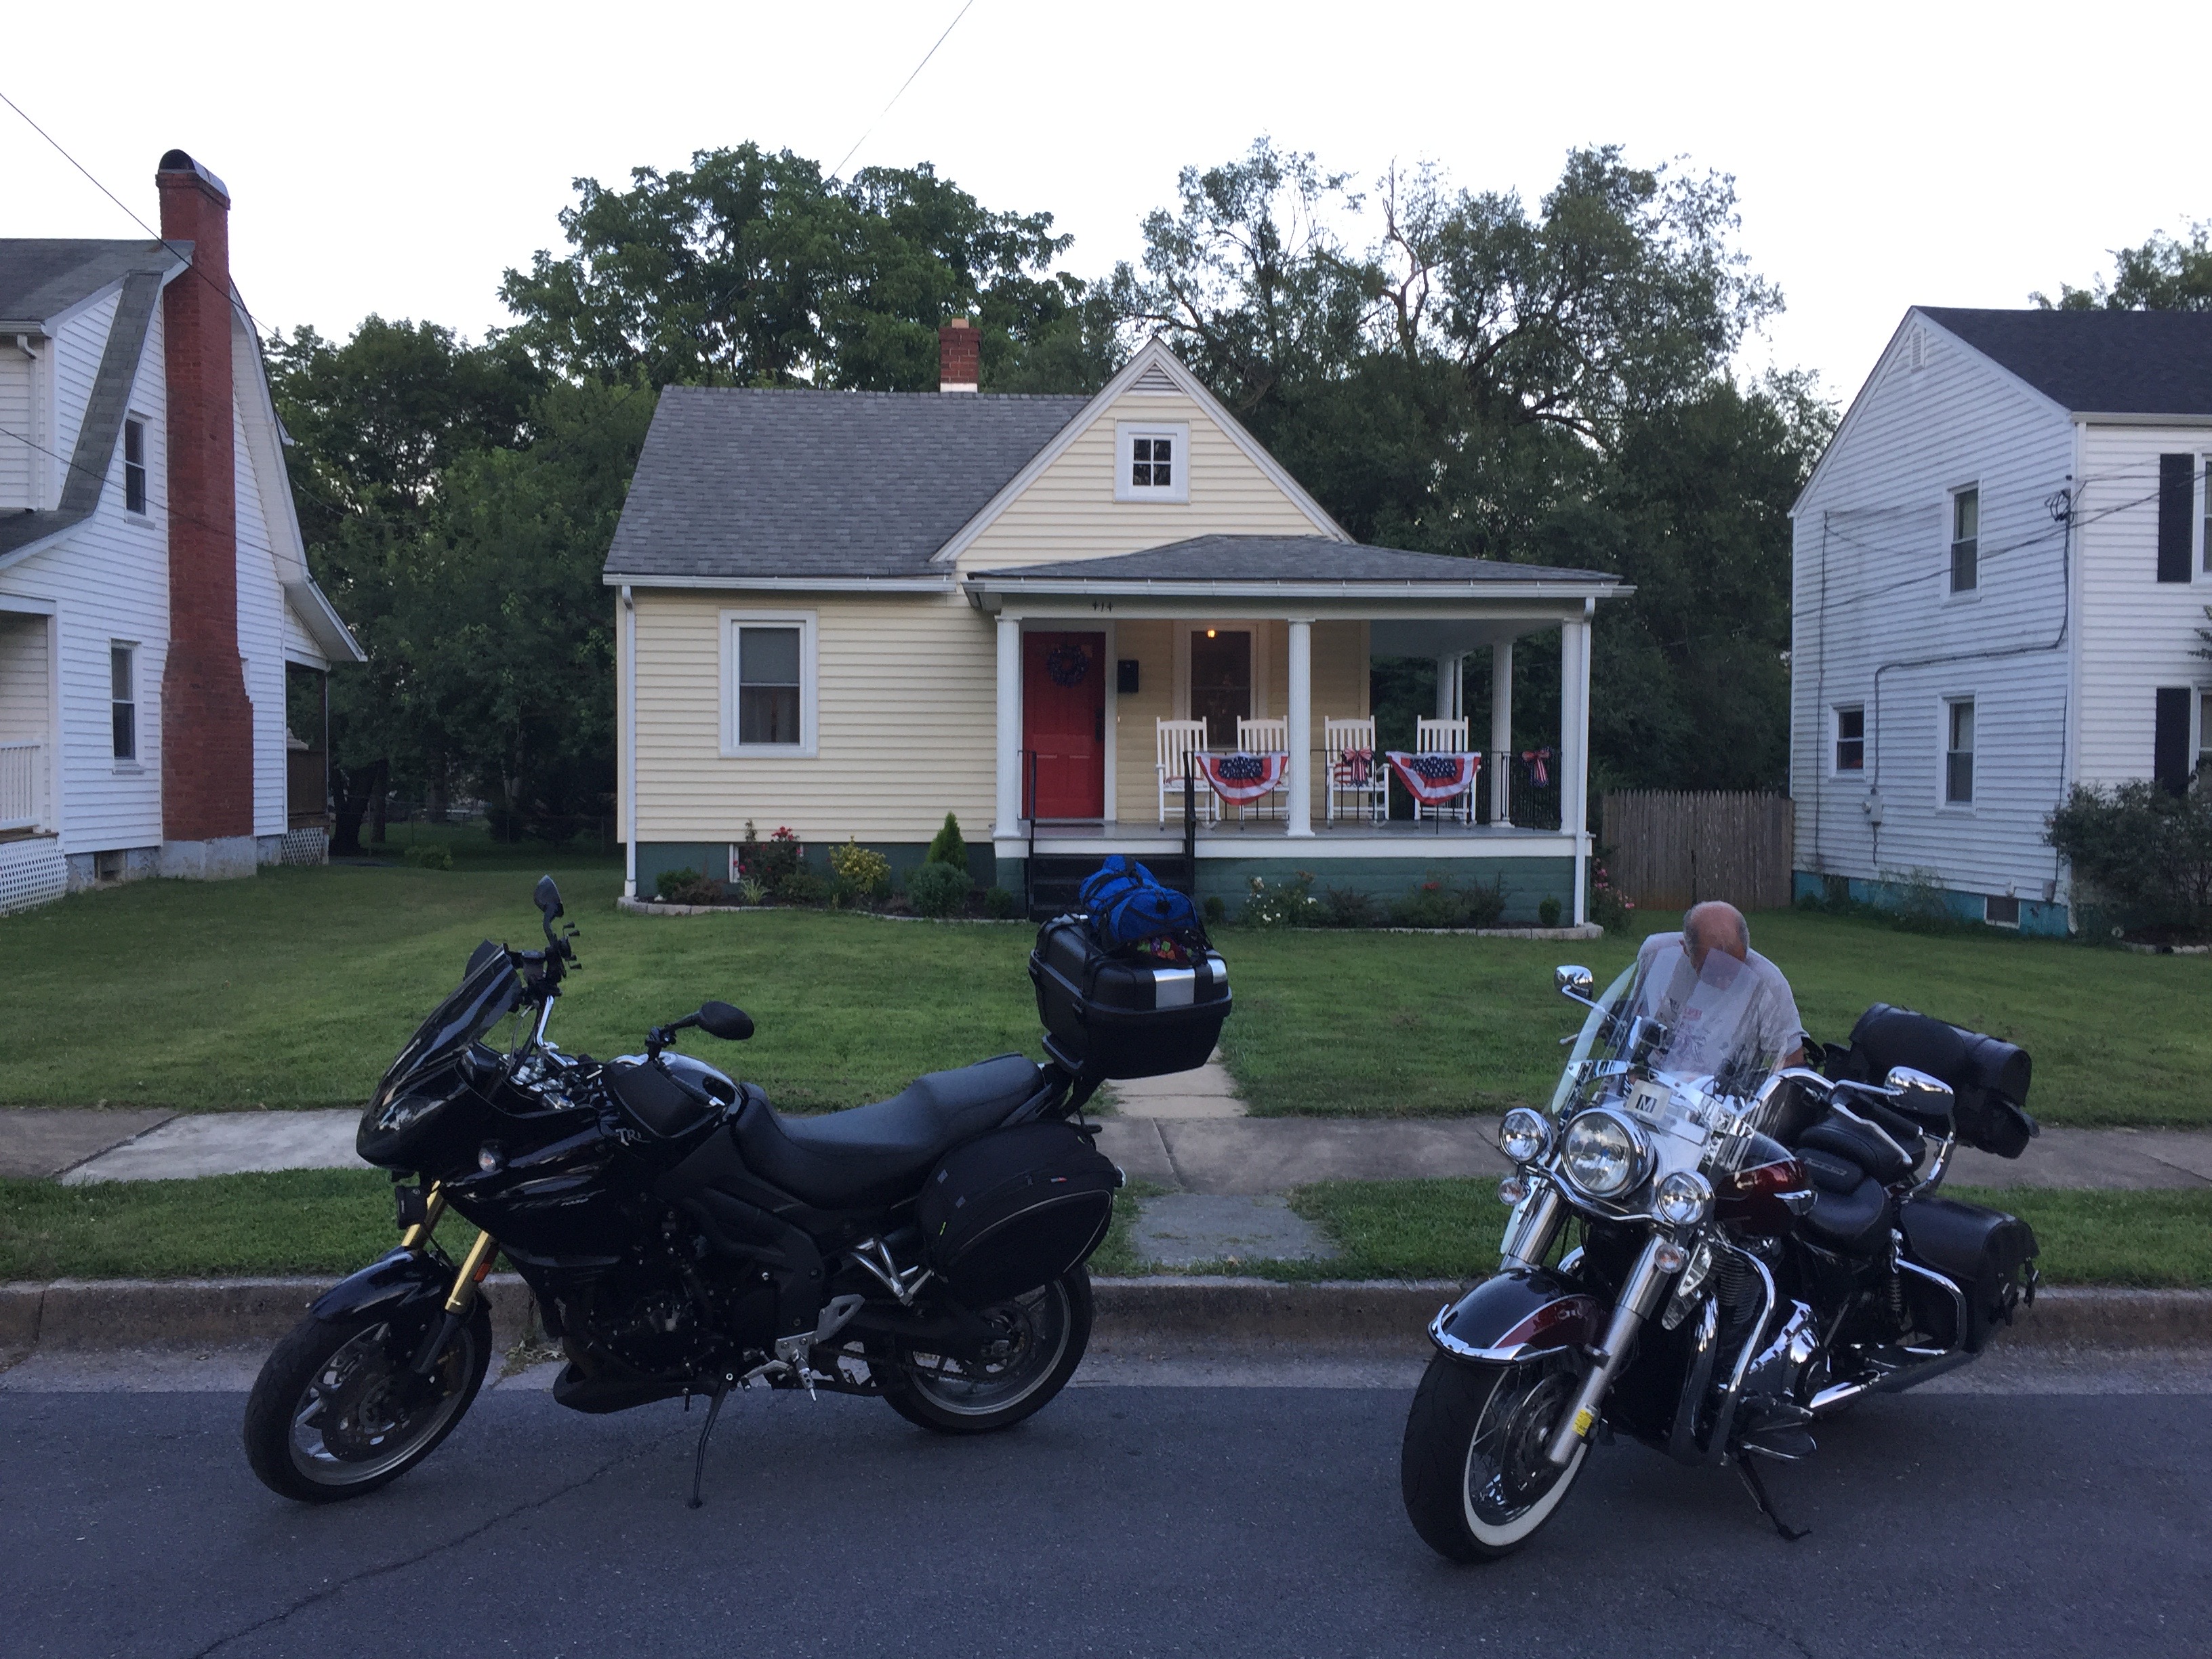 Two Motorcycles Parked in front of a house in VA